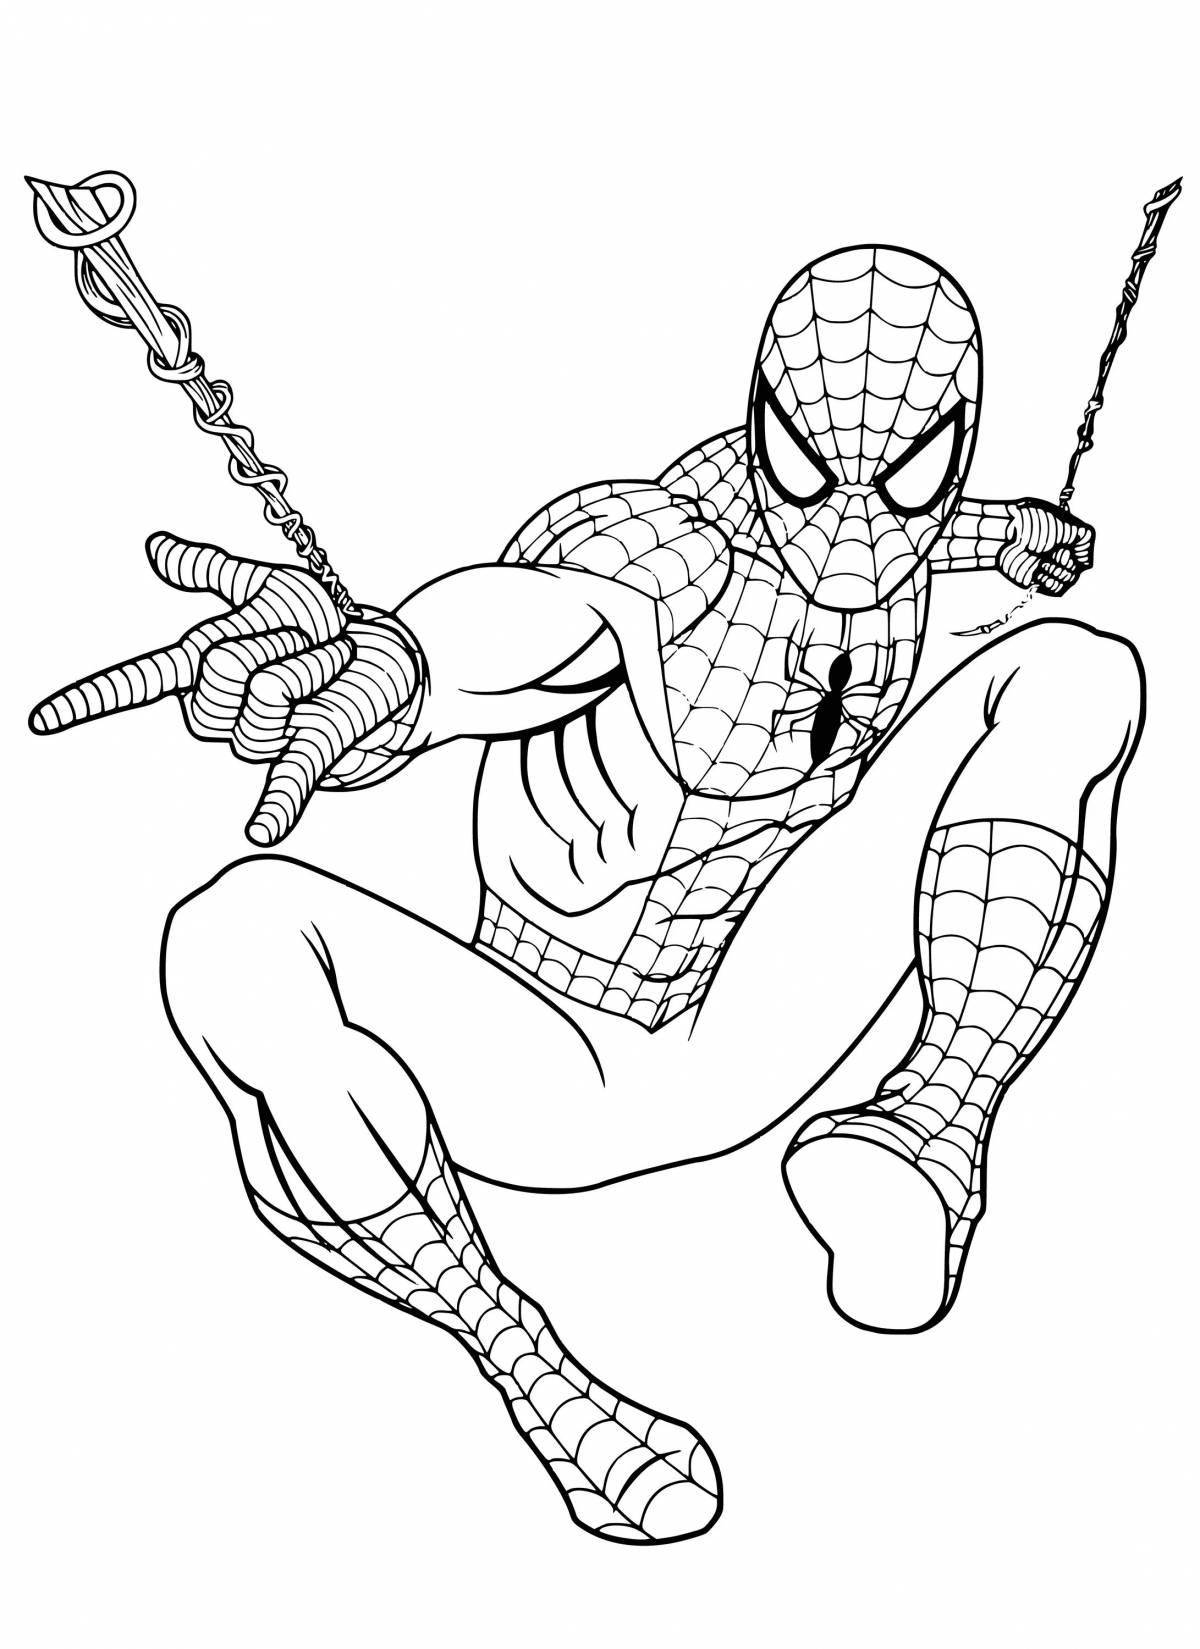 Mysterious spider-man coloring book